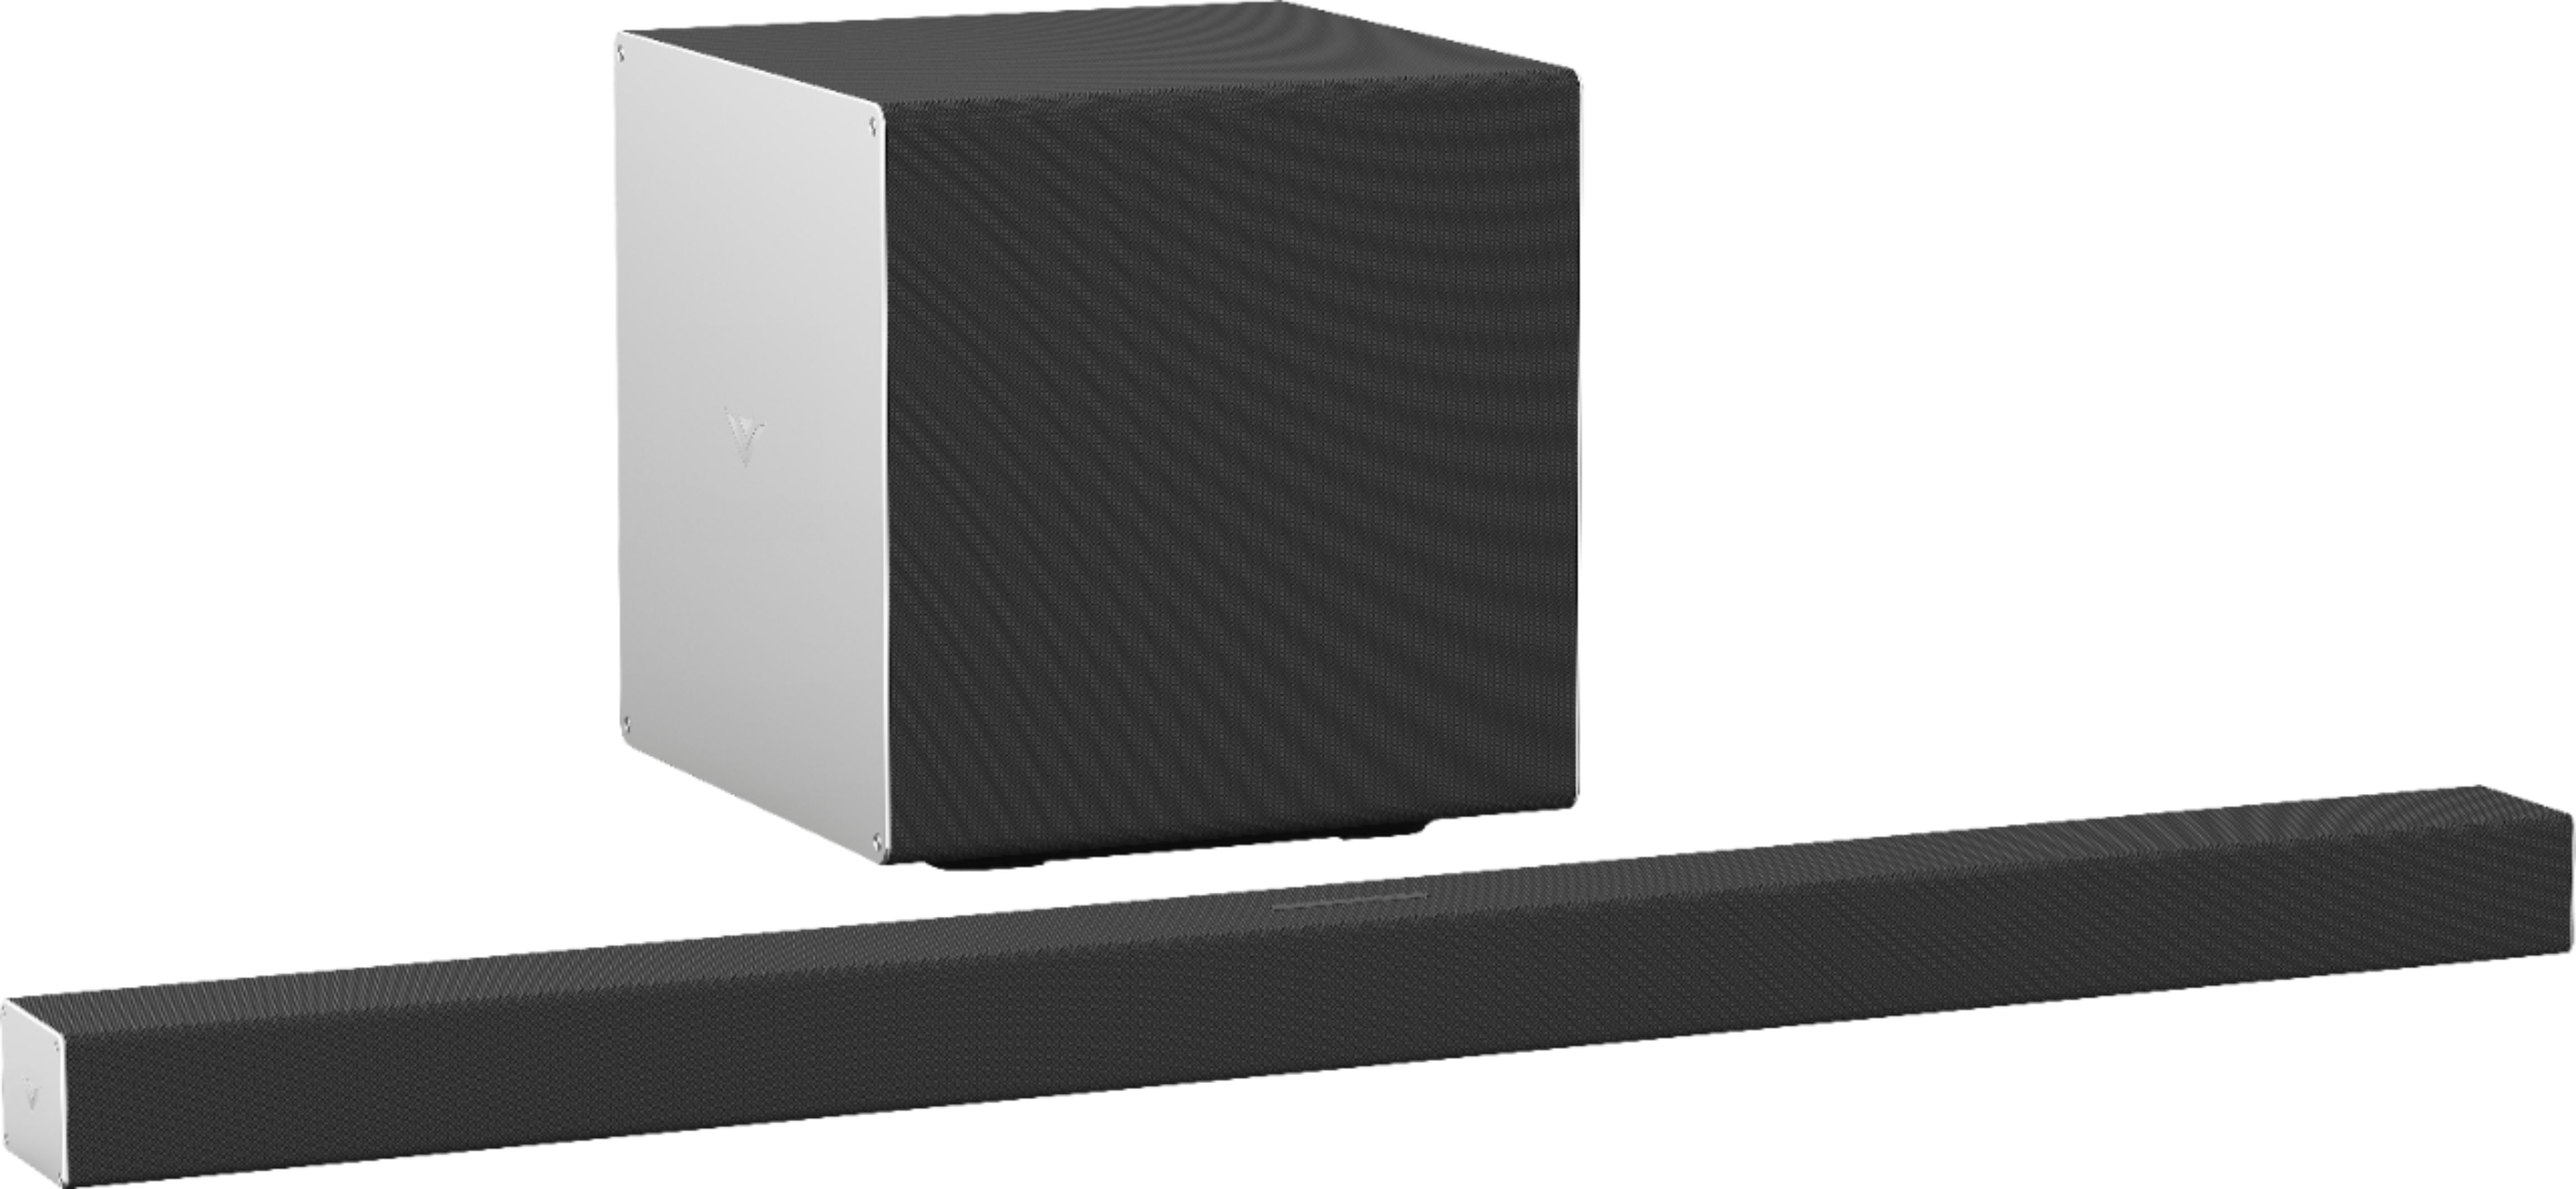 Angle View: VIZIO - 3.1.2-Channel Soundbar with Wireless Subwoofer, Dolby Atmos and Voice Assistant - Black